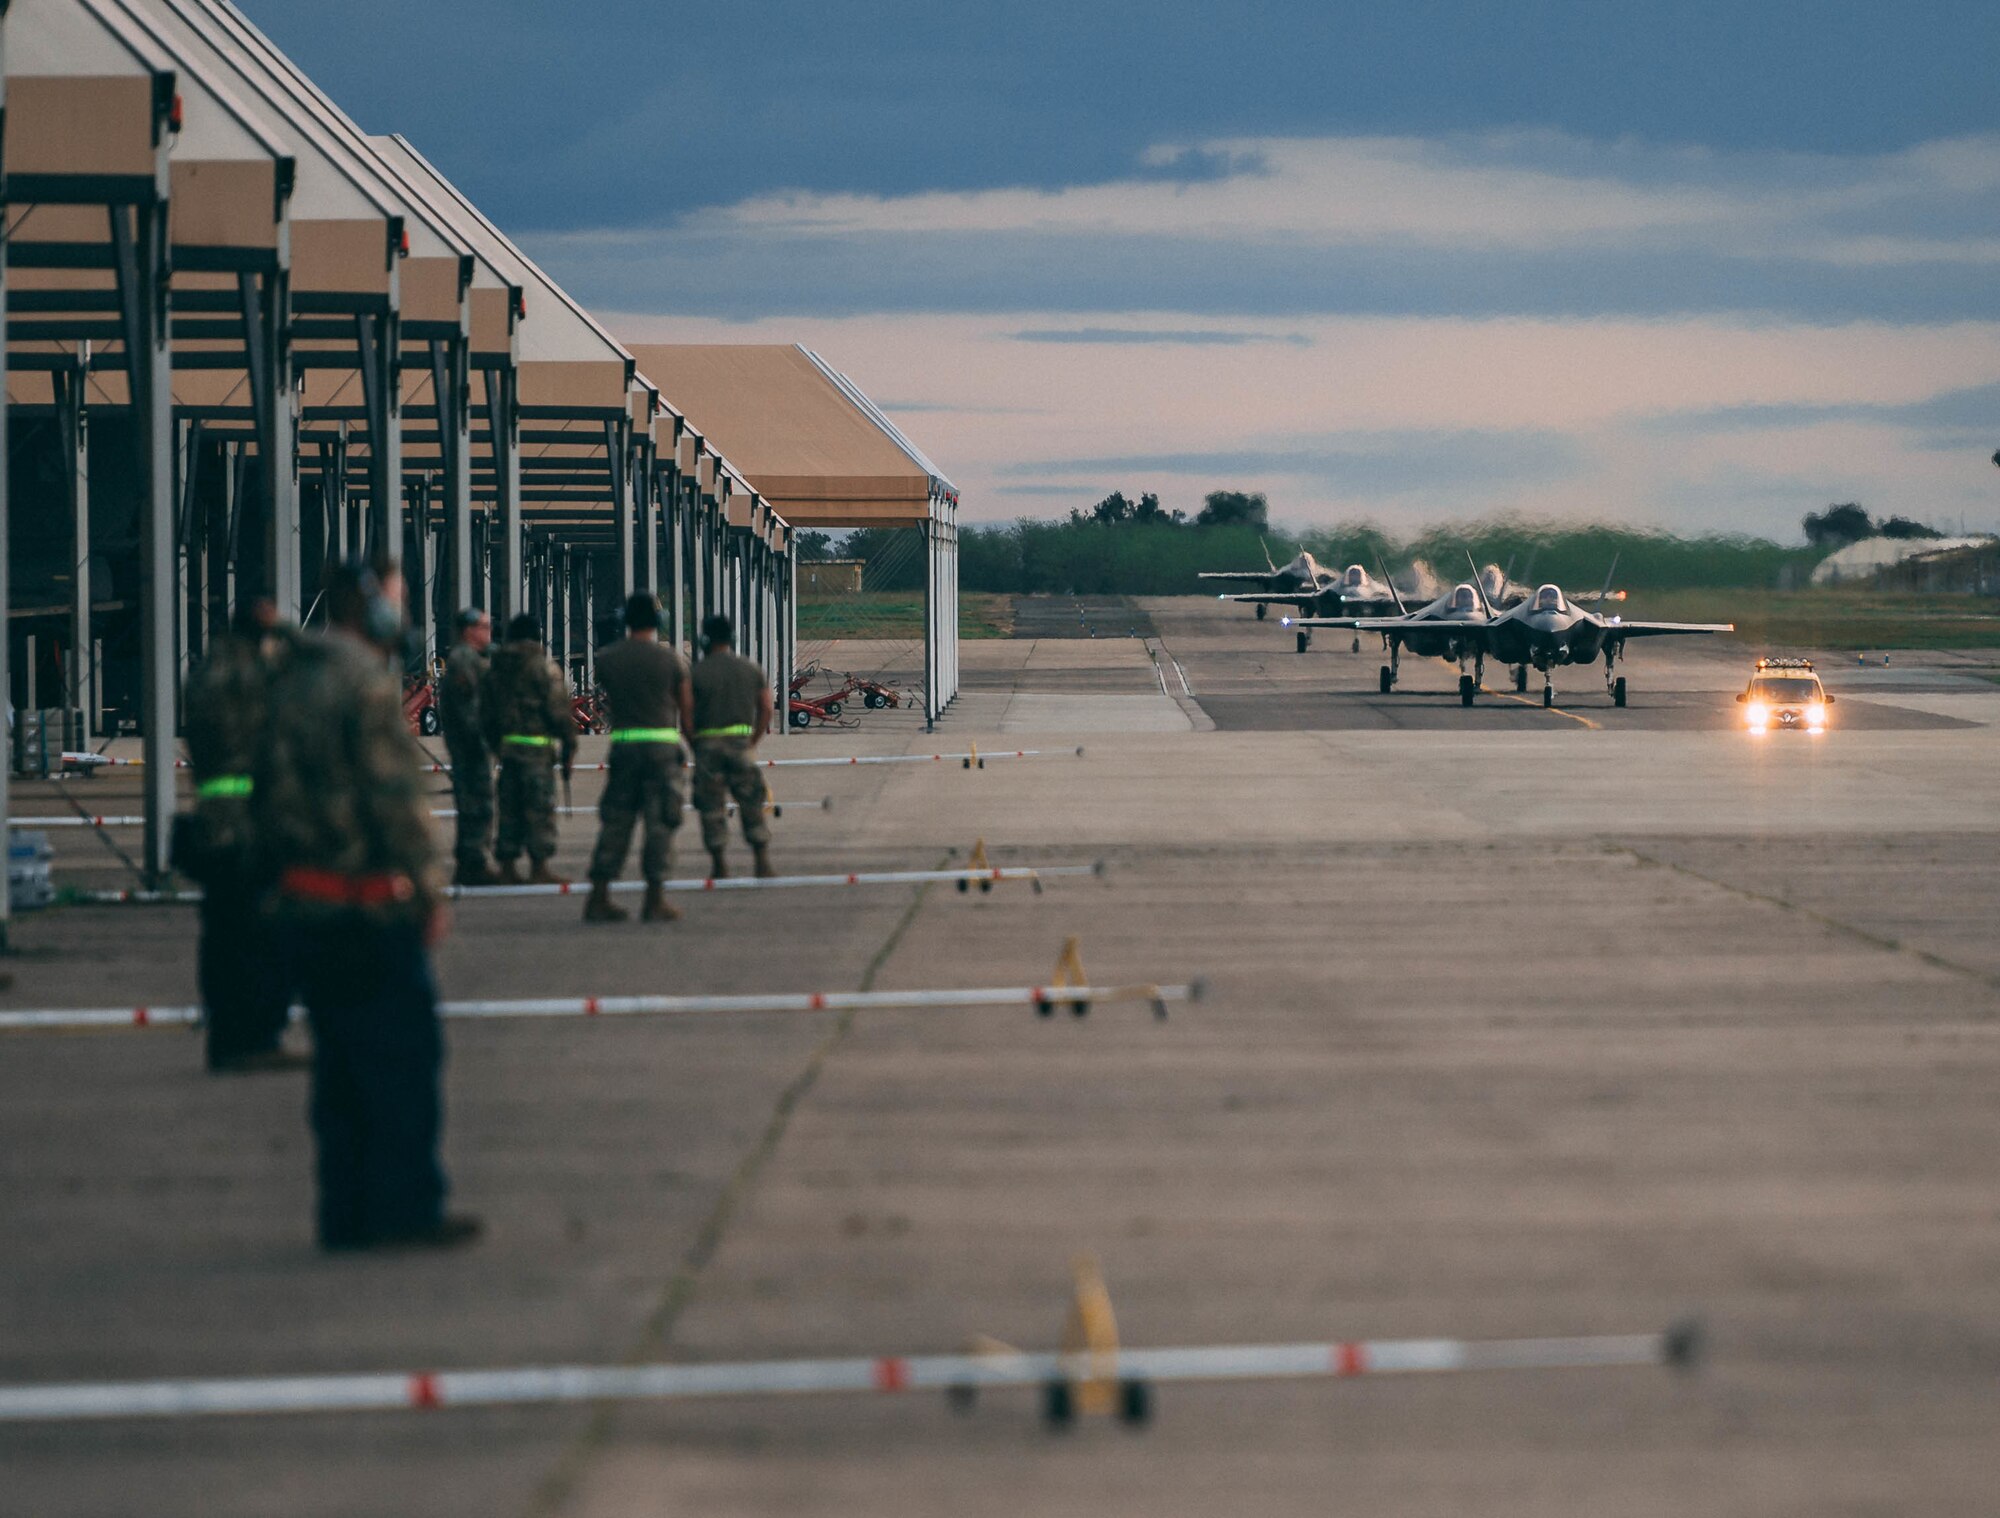 U.S. Air Force F-35A Lightning IIs assigned to the 4th Fighter Squadron, Hill Air Force Base, Utah, taxi down the flightline at Mont-de-Marsan Air Base, France, upon arrival May 10, 2021. During their time in the European theater, the 4th FS aircraft will participate in multiple events, including Atlantic Trident 21, underscoring the steadfast U.S. commitment to the region and enhancing interoperability with NATO allies and partners. (U.S. Air Force photo by Staff Sgt. Alexander Cook)